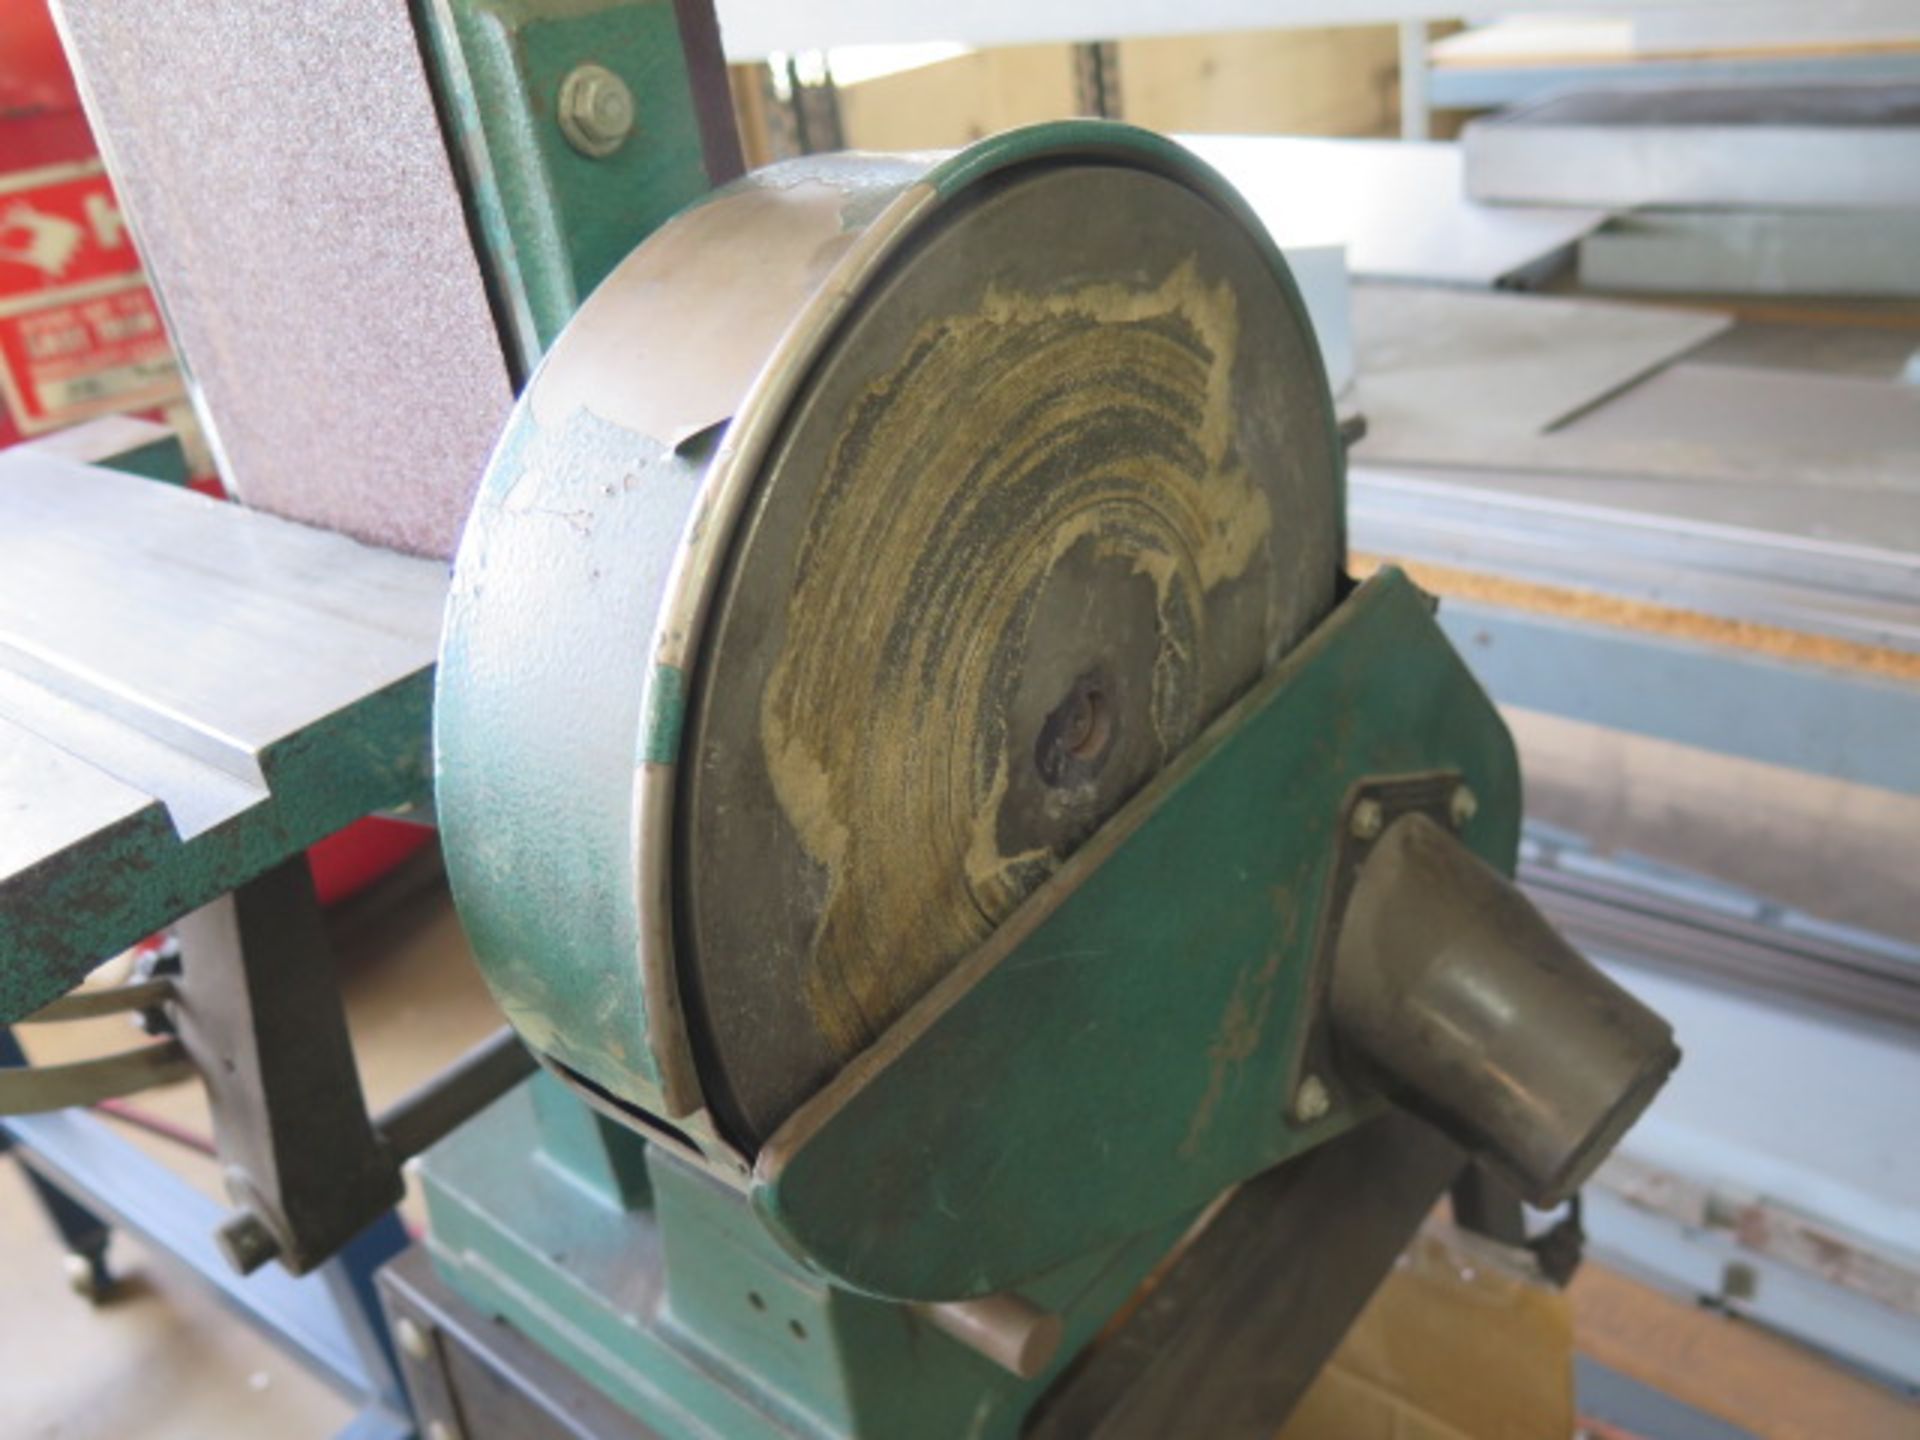 Grizzly mdl. G1014Z 6" Belt / 9" Disc Sander s/n 9-0196 w/ Roll Stand (SOLD AS-IS - NO WARRANTY) - Image 5 of 7